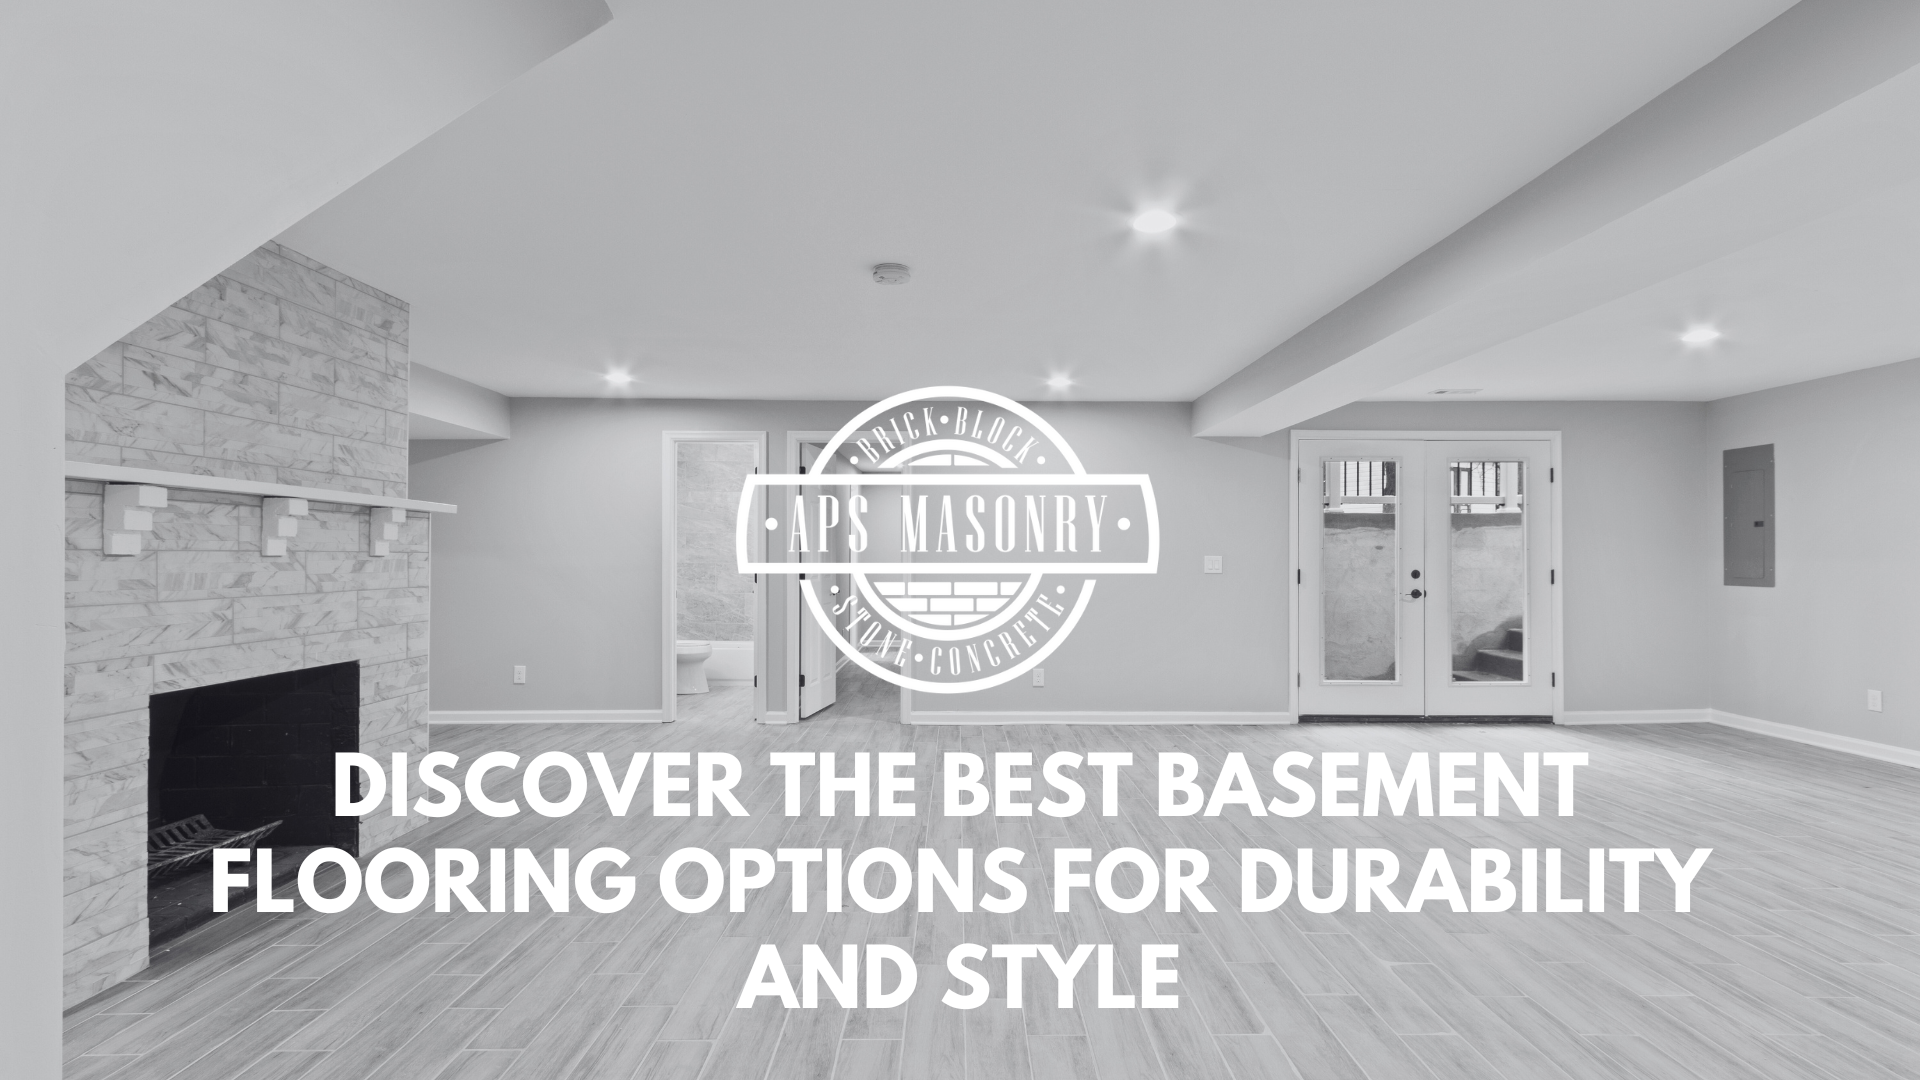 Discover the Best Basement Flooring Options for Durability and Style